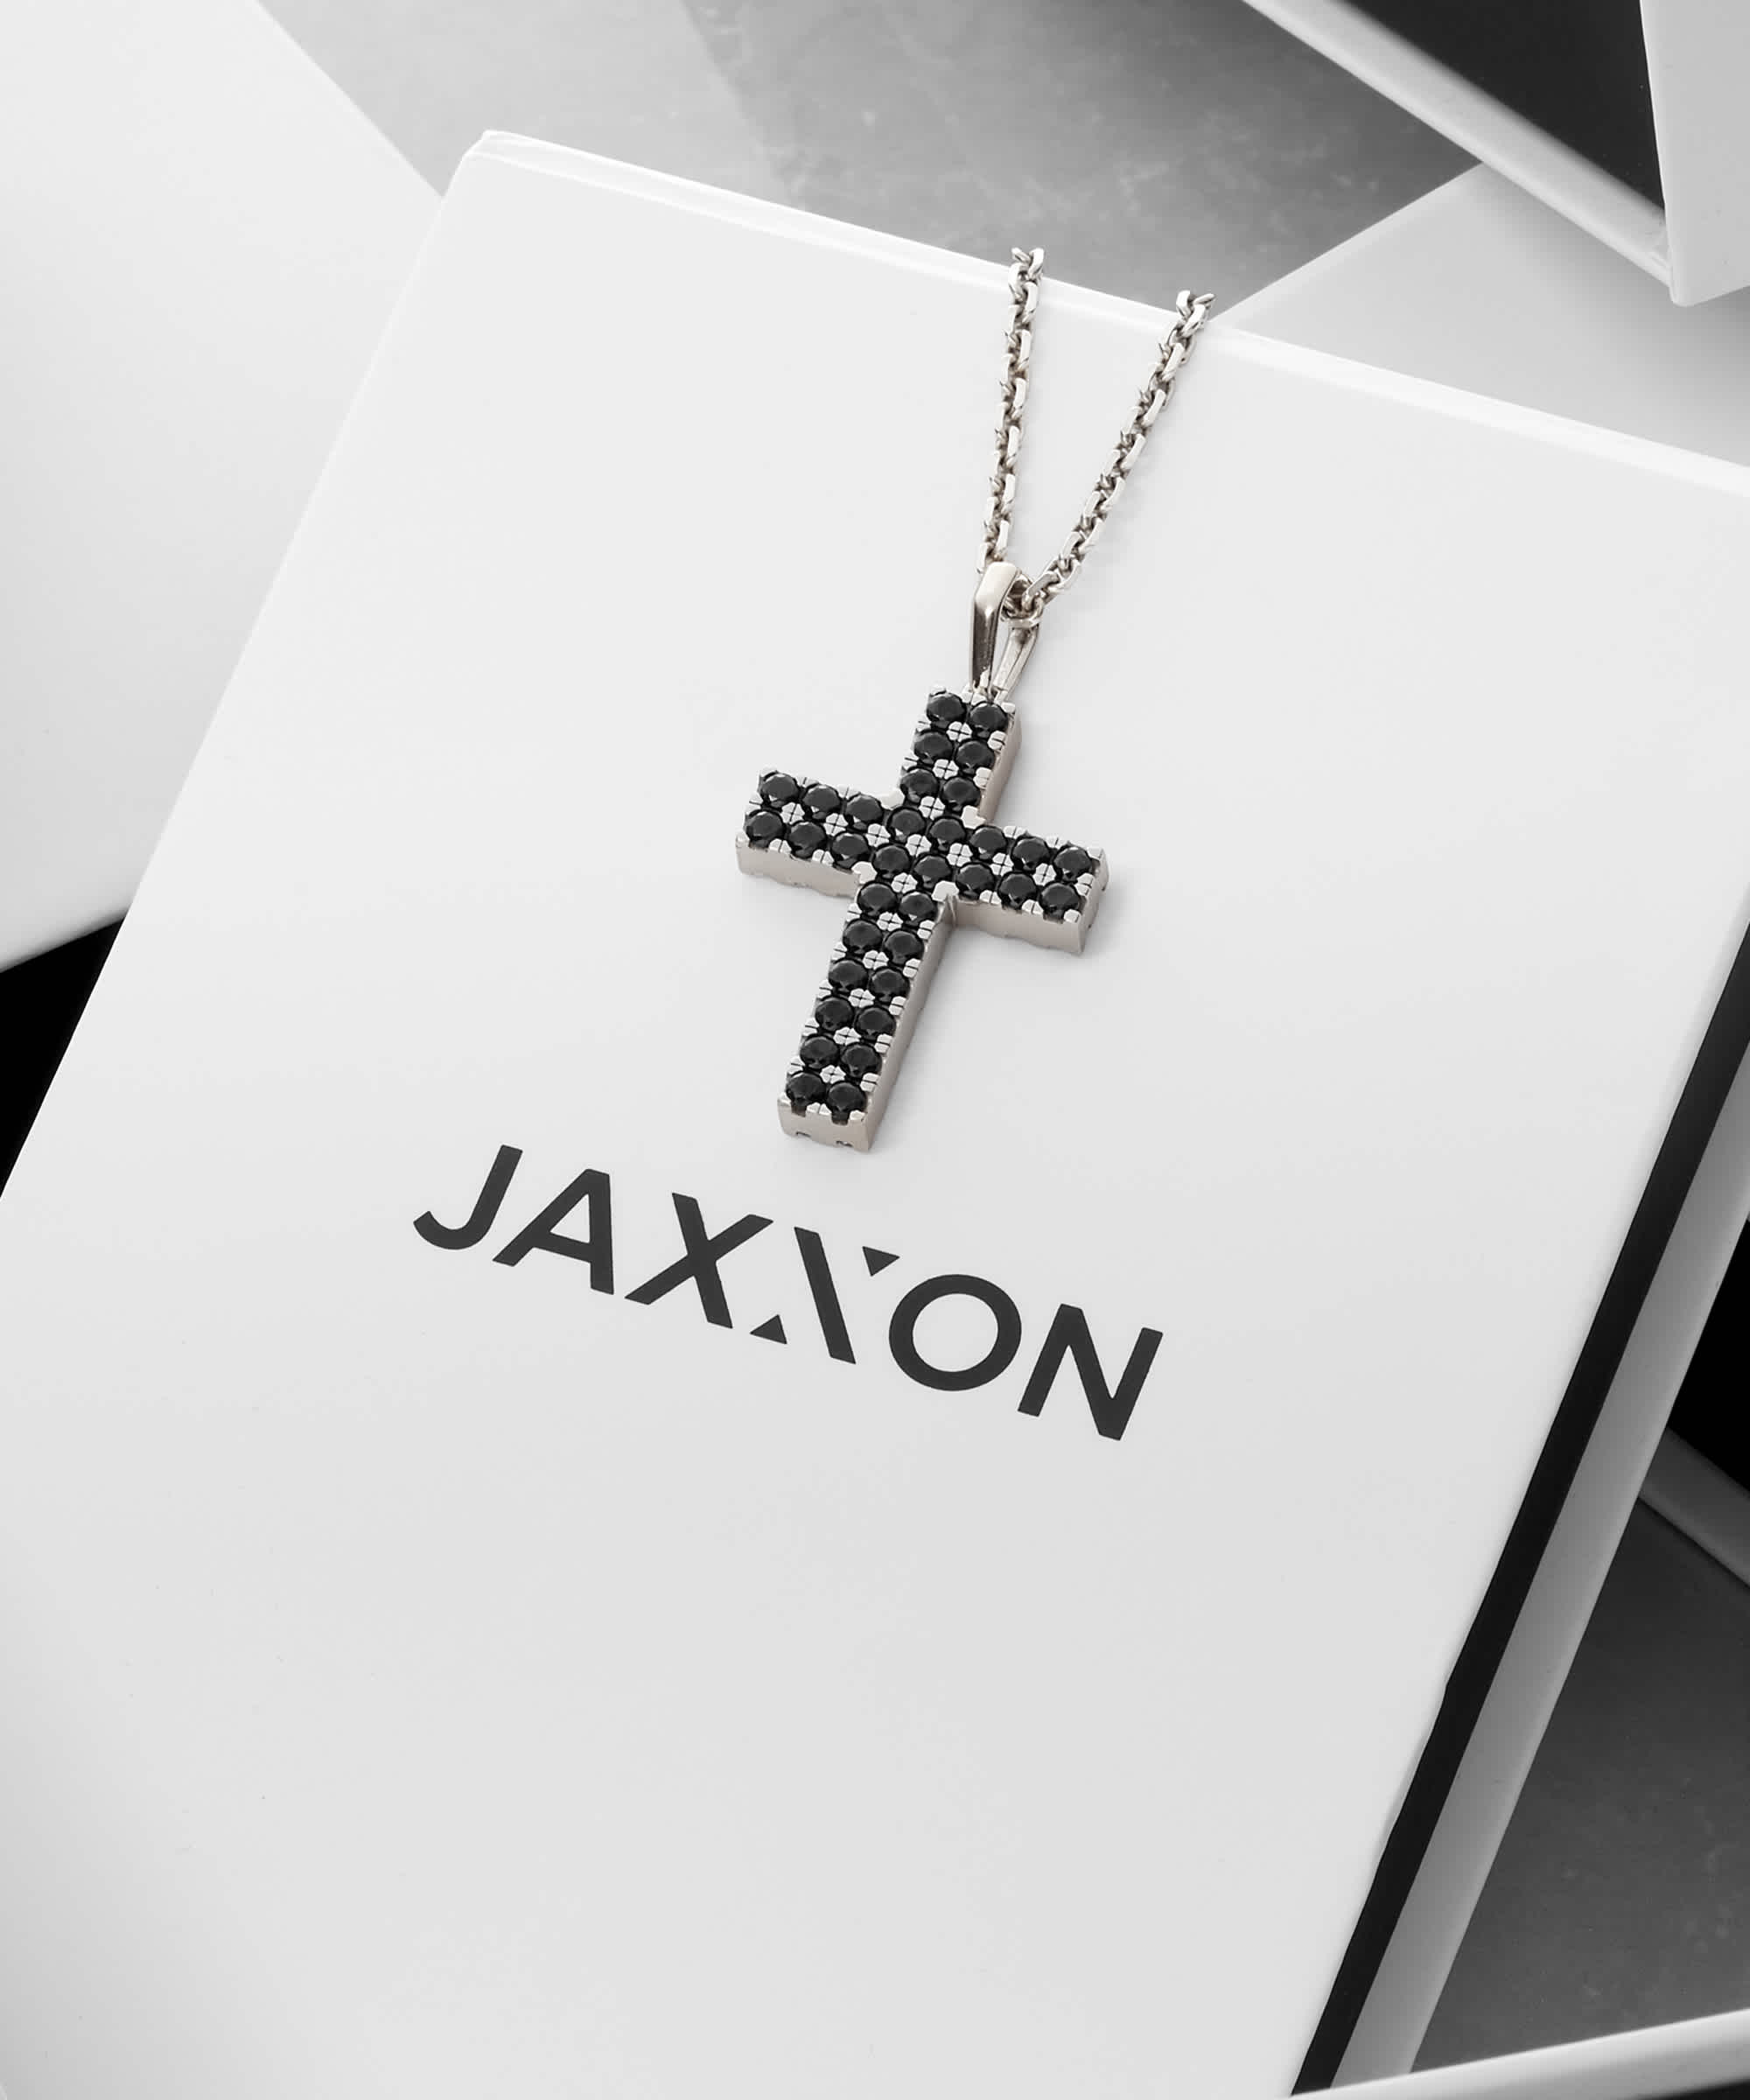 Attention to Detail - Silver Reversible Cross Pendant Necklace